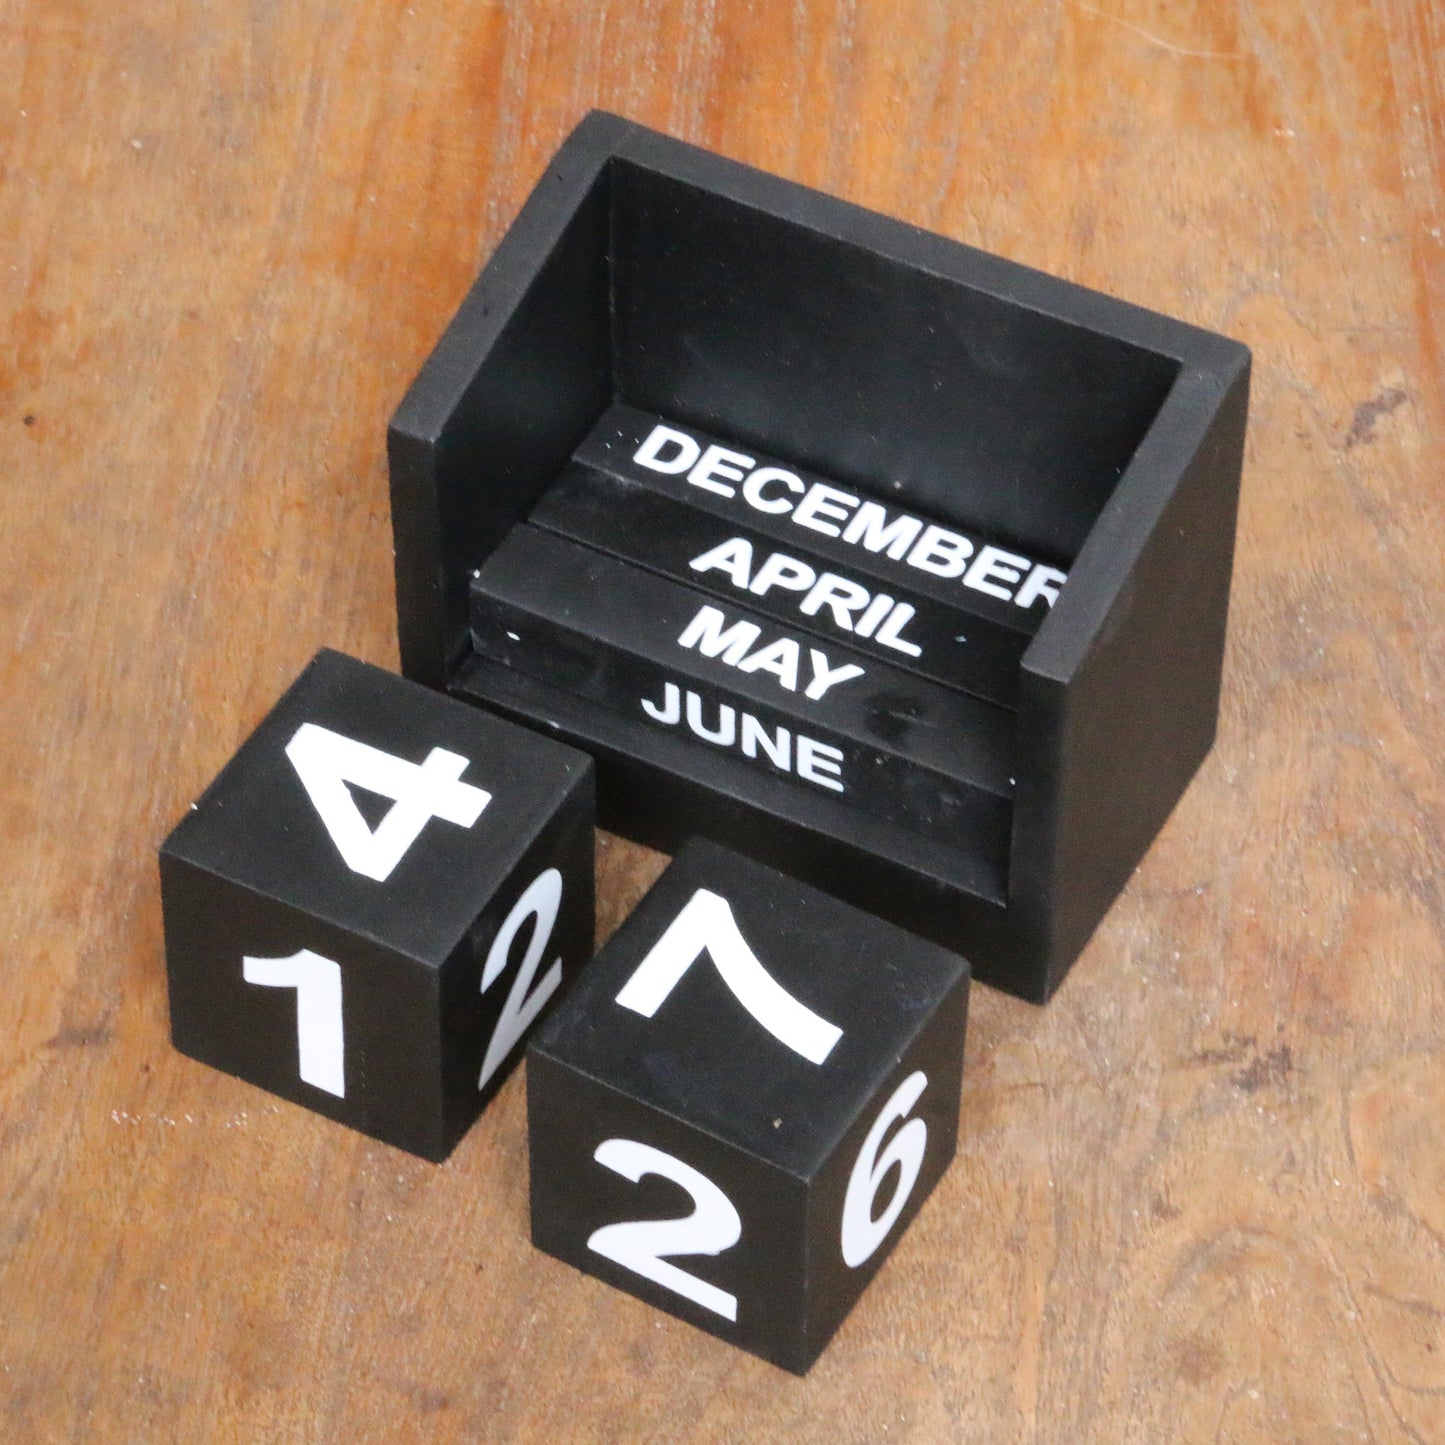 Counting the Days in Black Wood Perpetual Calendar in Black from Bali